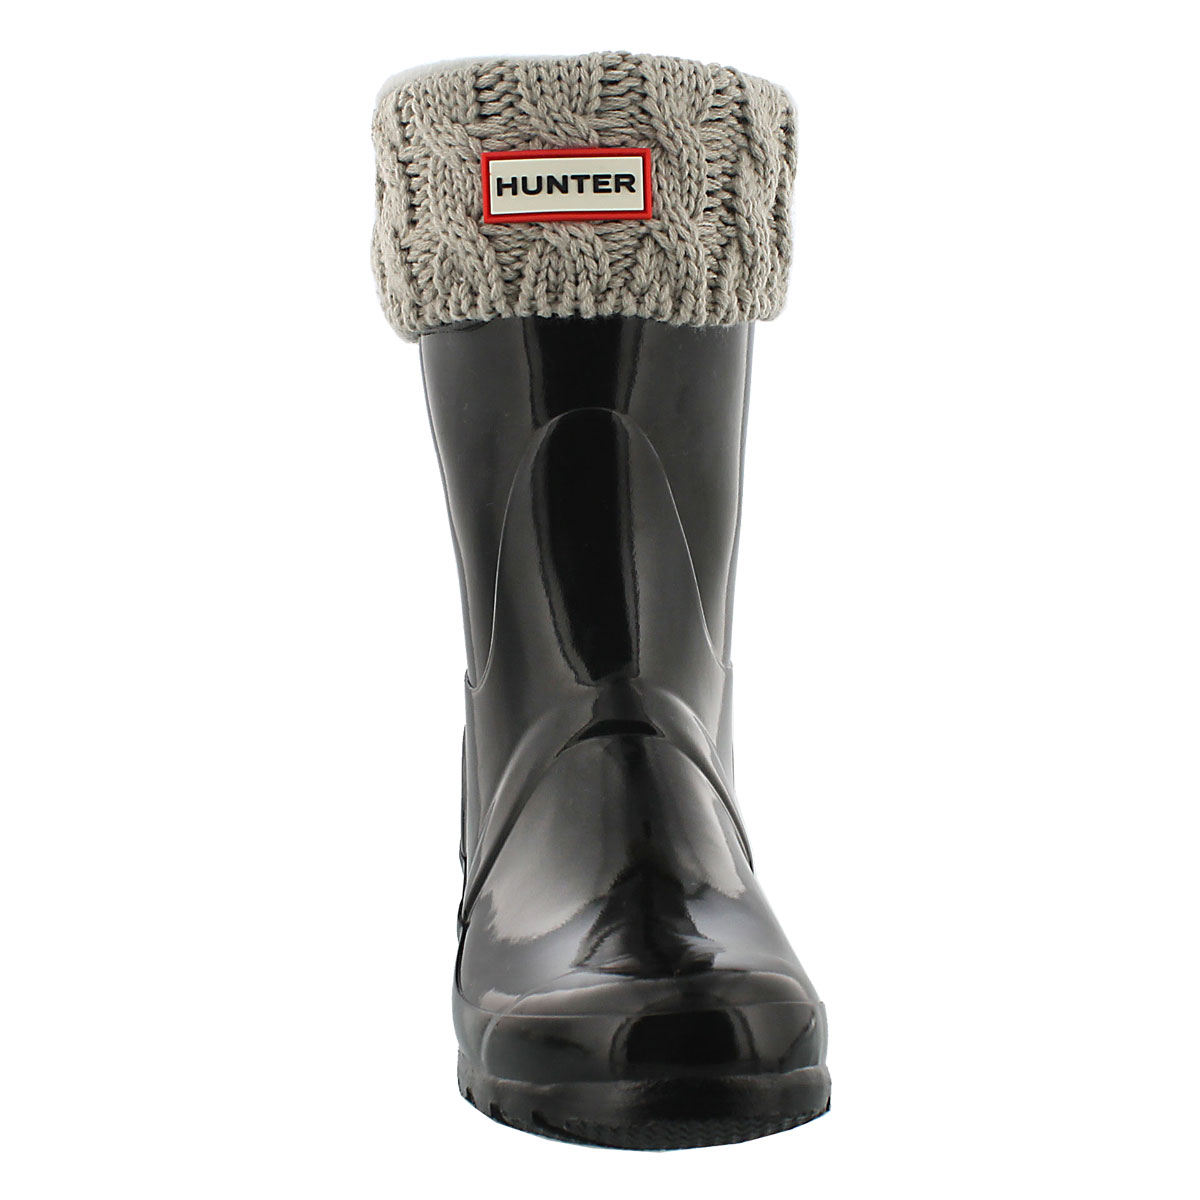 Kids' 6 Stitch Cable Boot Sock - Grey